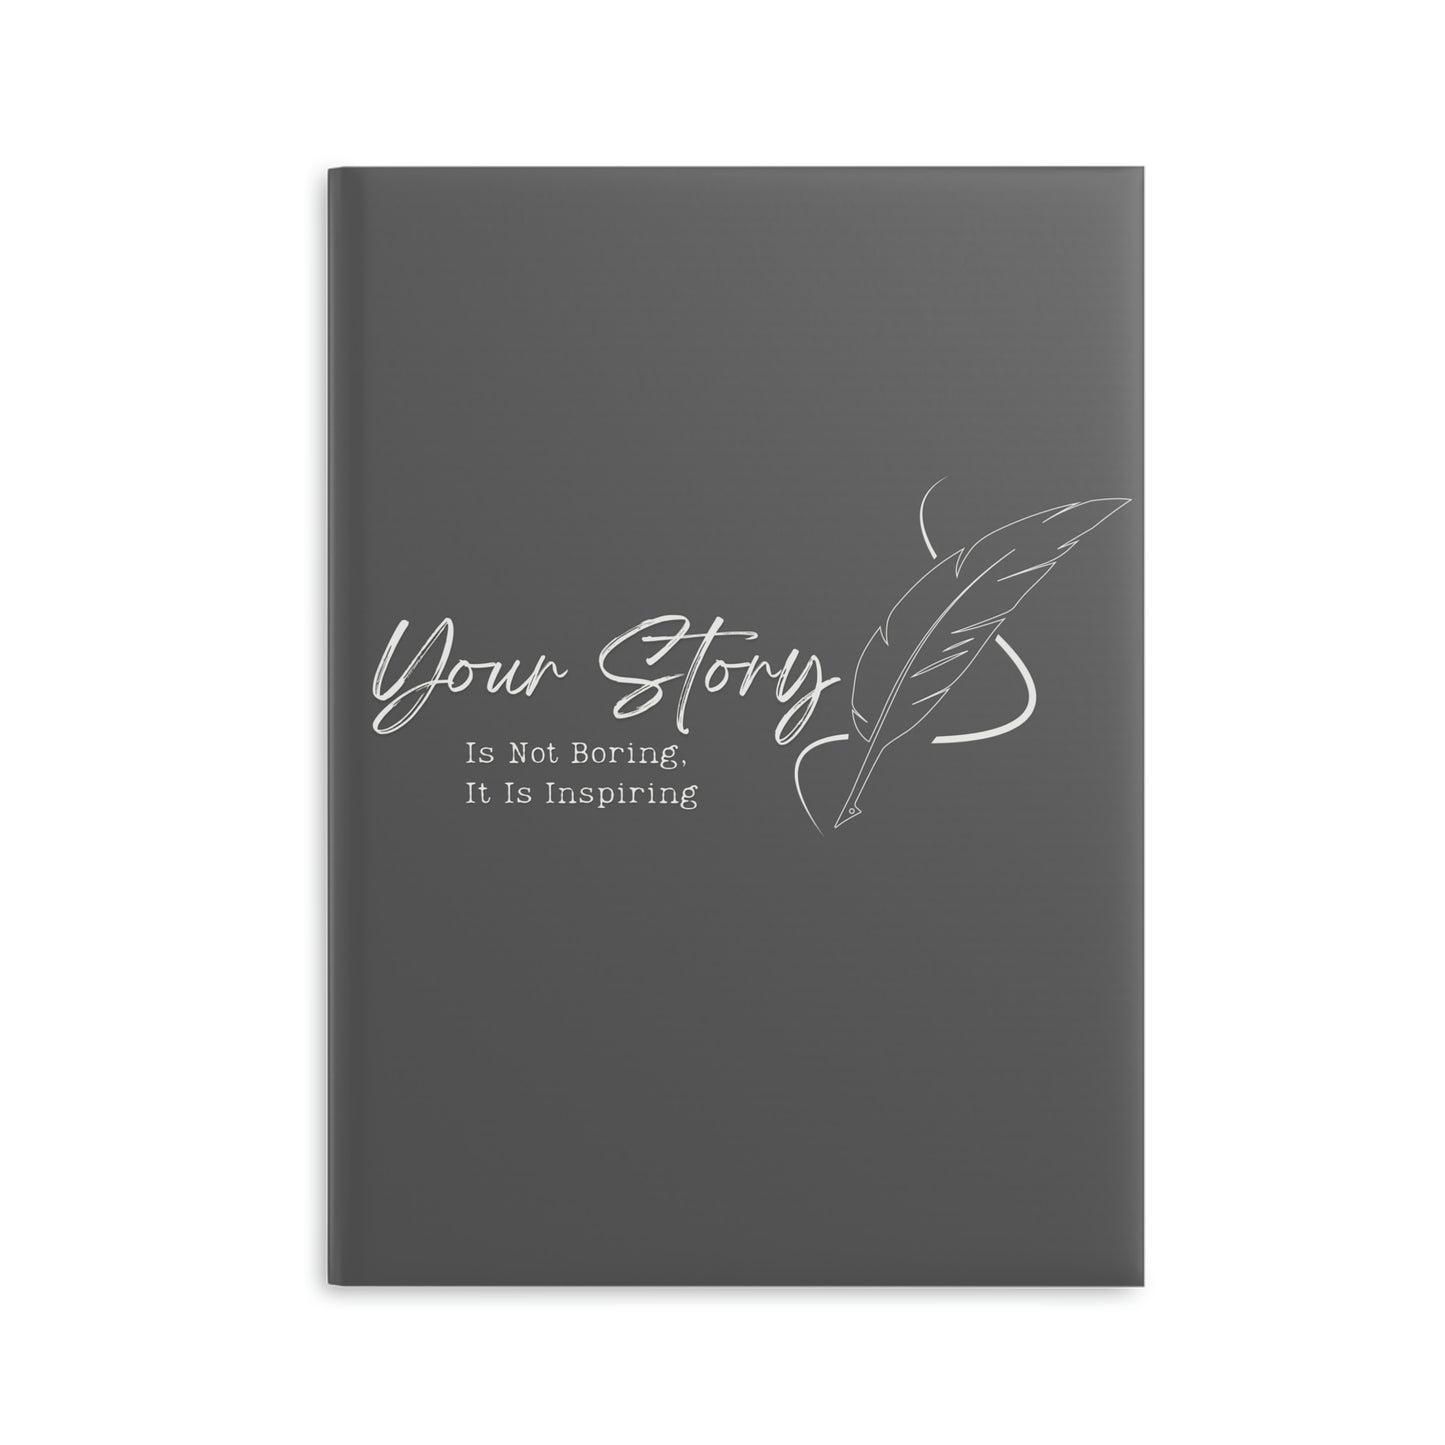 Hardcover Notebook with Puffy Covers (Gray) // Your story is not boring // Write Out Loud